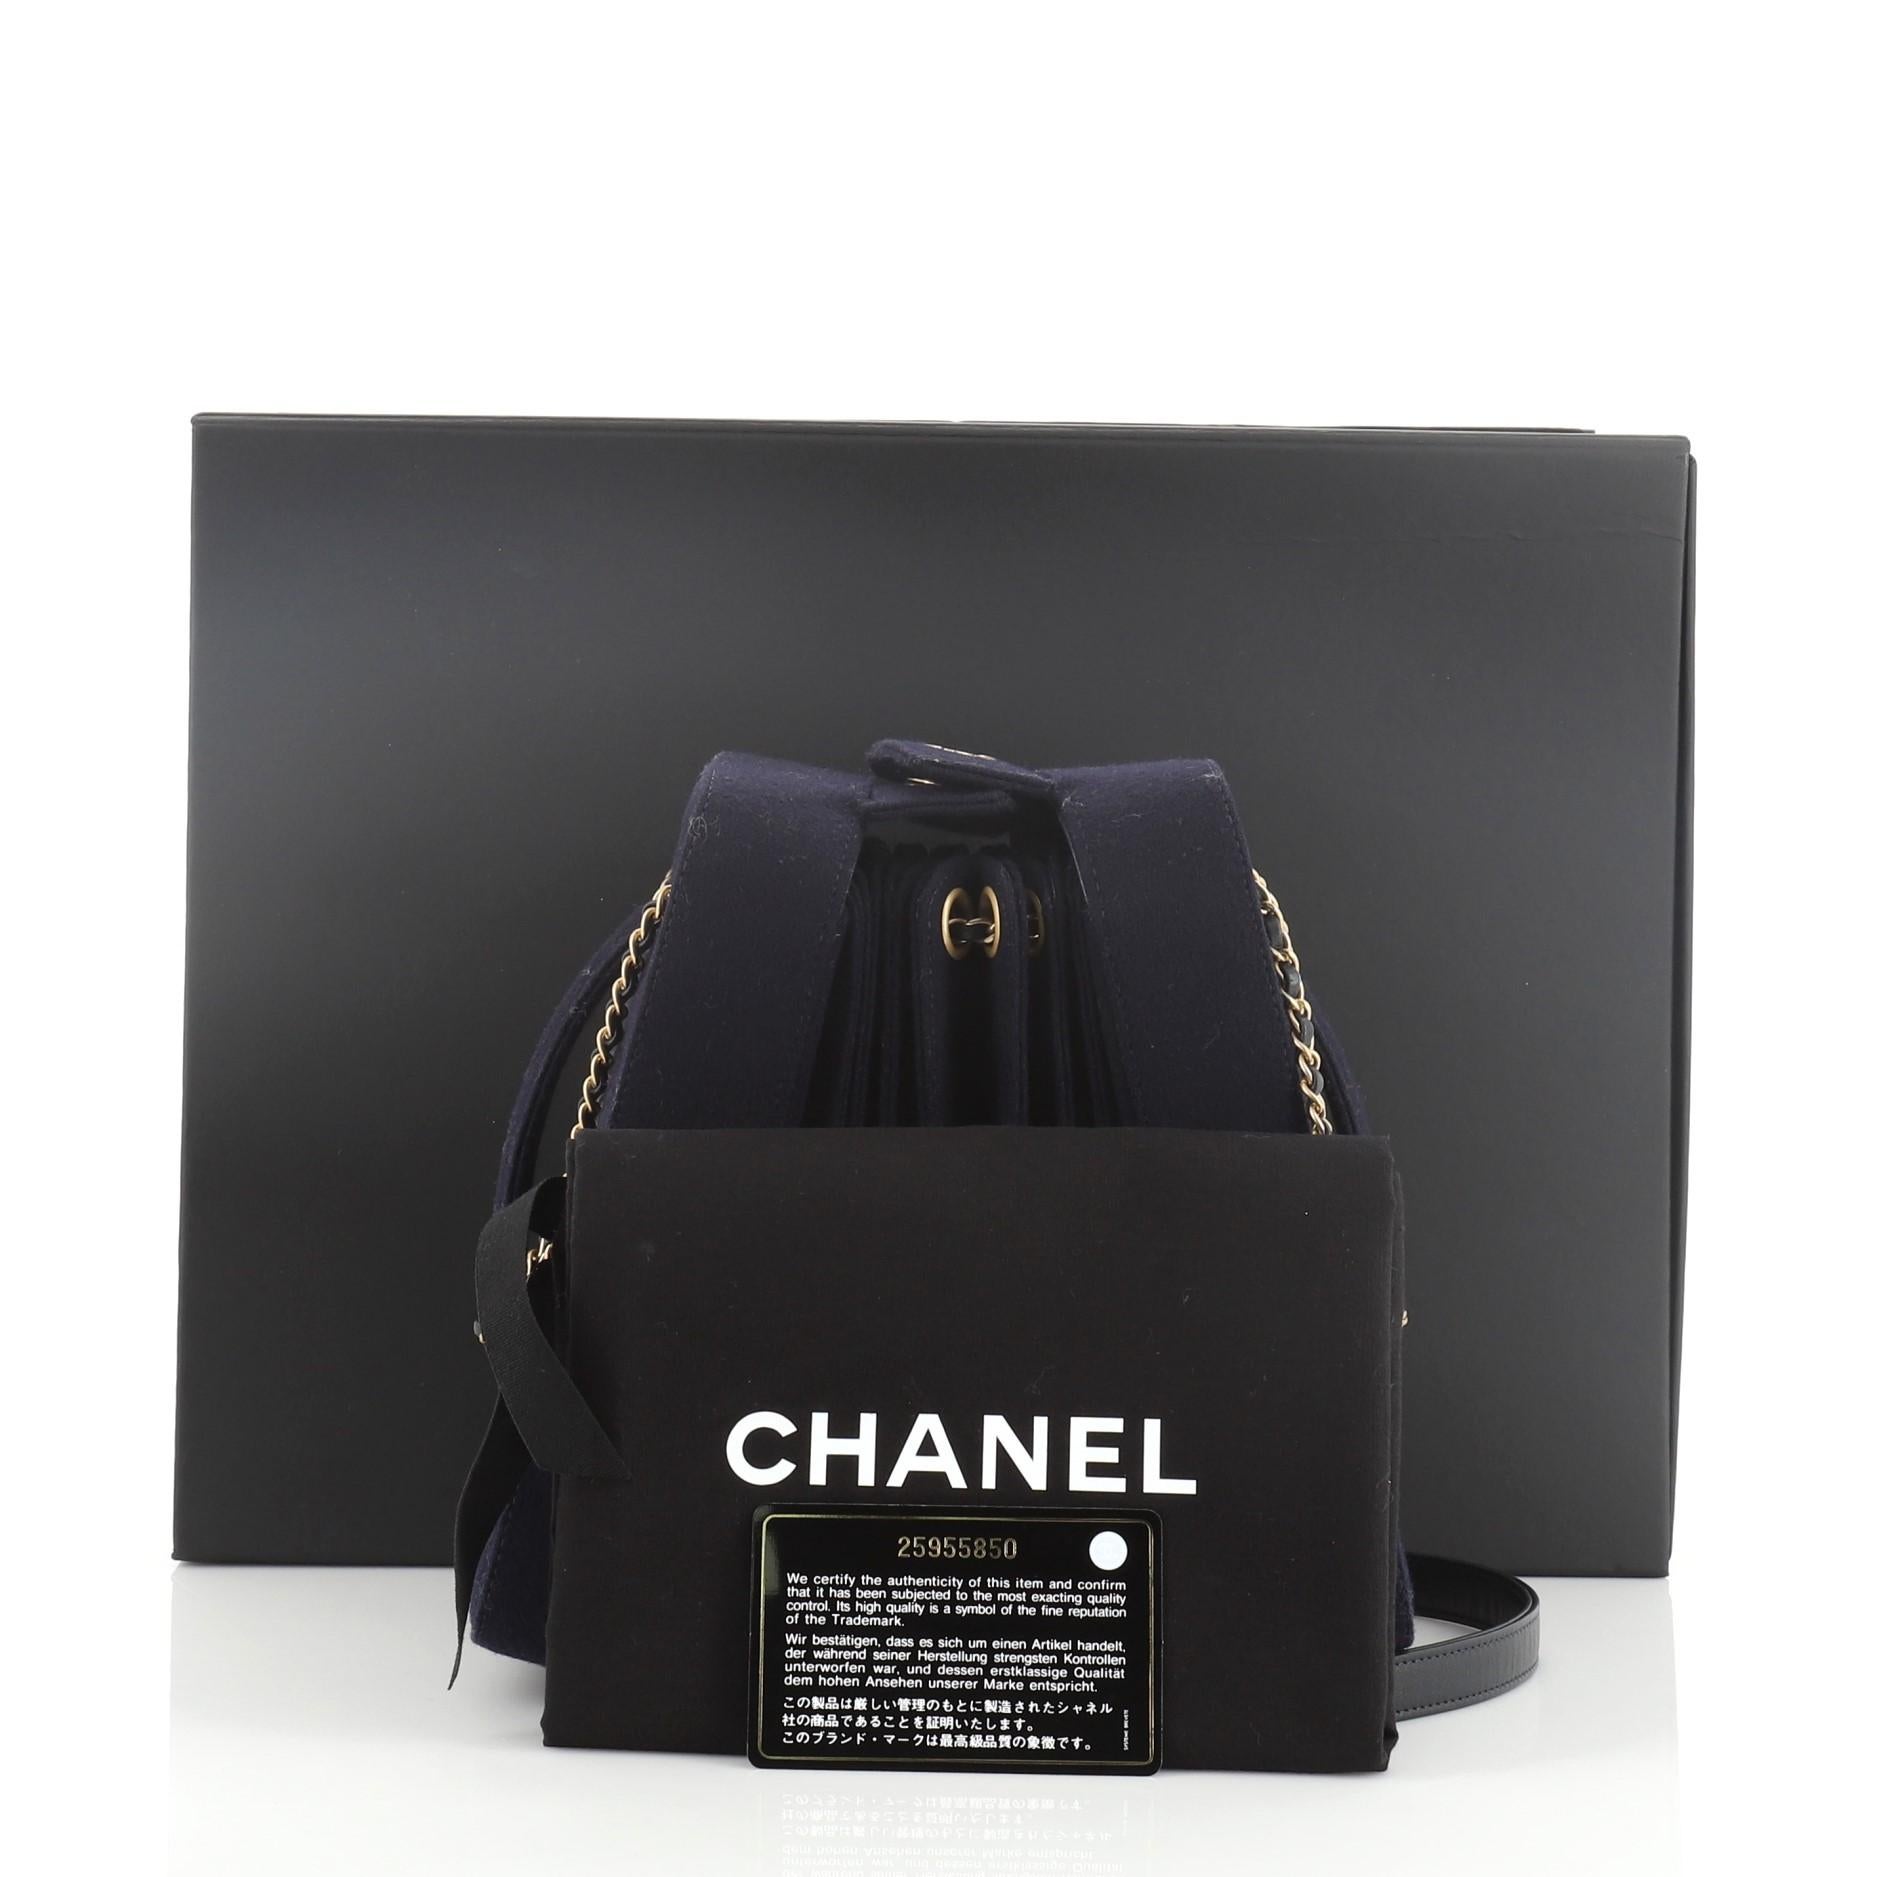 This Chanel Paris-Hamburg Accordion Bag Quilted Wool, crafted in blue quilted wool, features woven in leather chain link strap, accordion sides and gold-tone hardware. It opens to a blue leather interior with side zip and slip pockets. Hologram